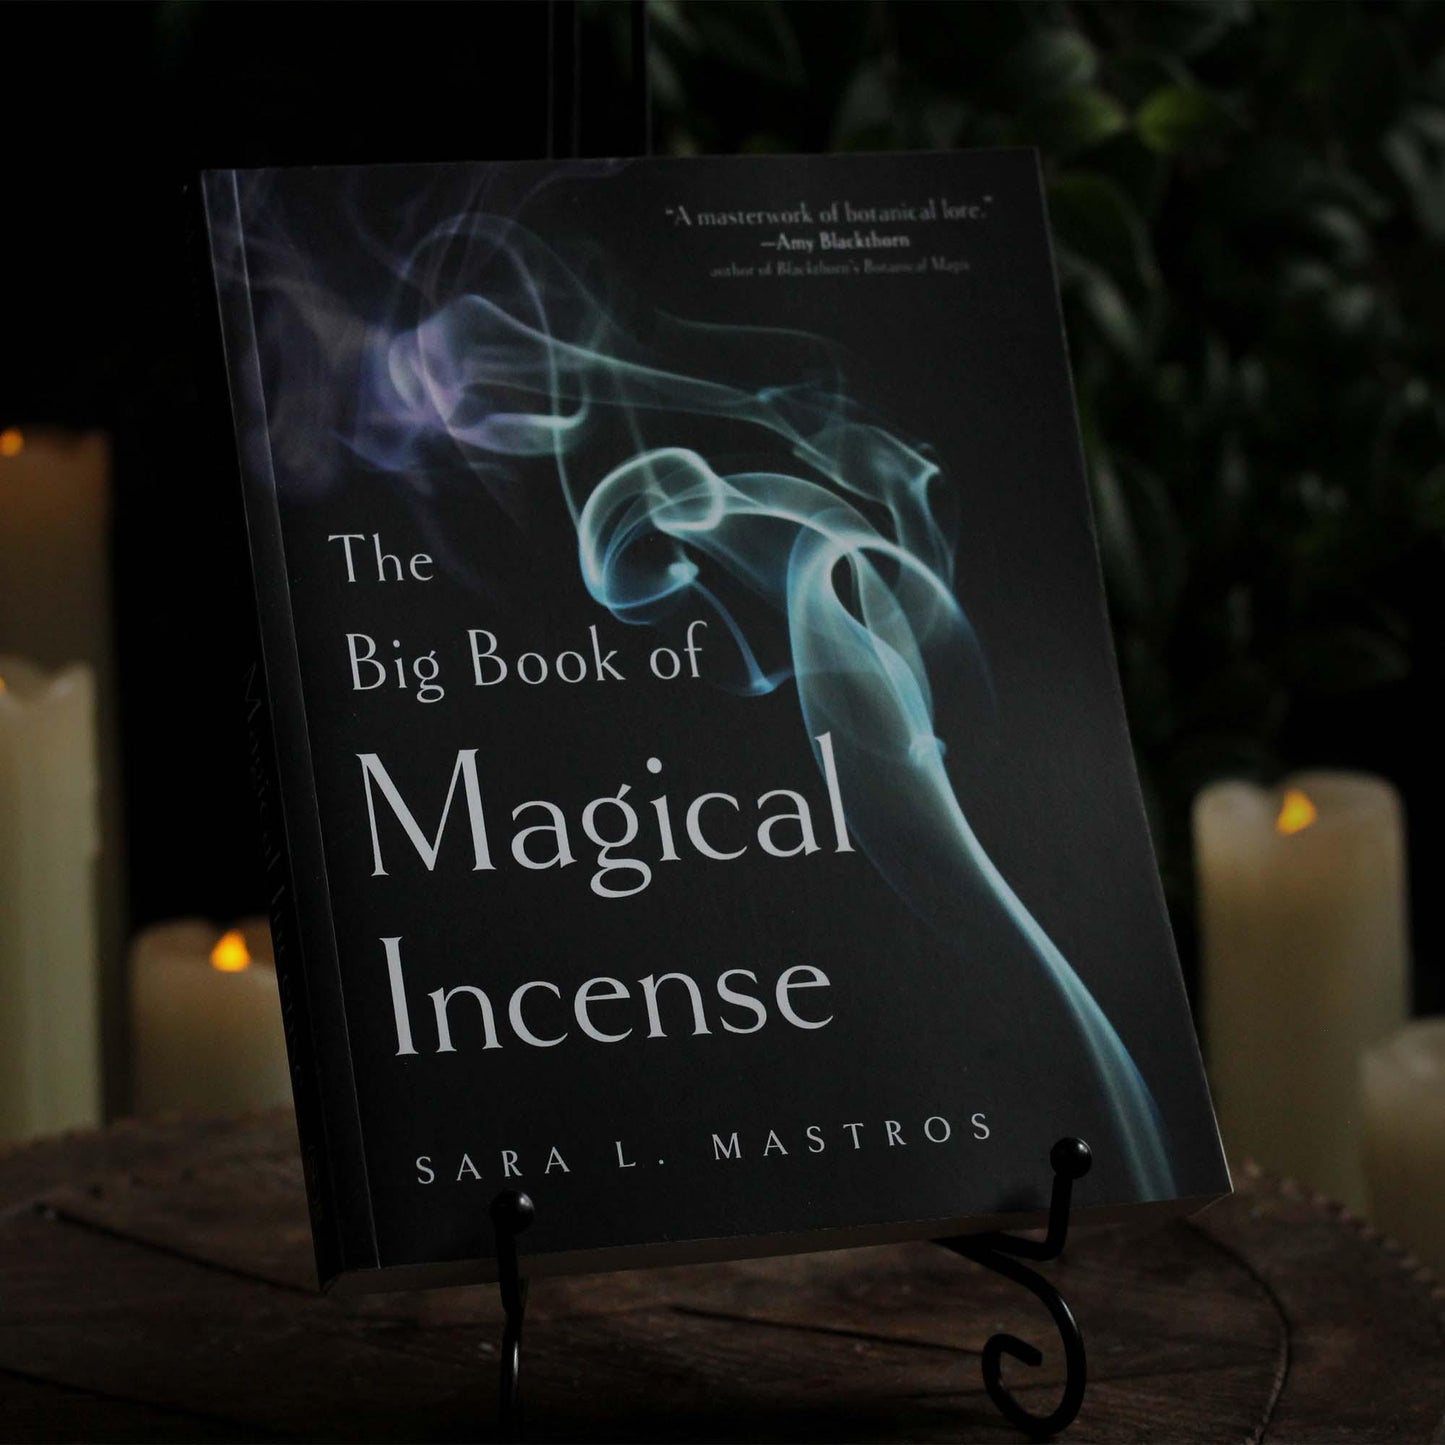 THE BIG BOOK OF MAGICAL INCENSE